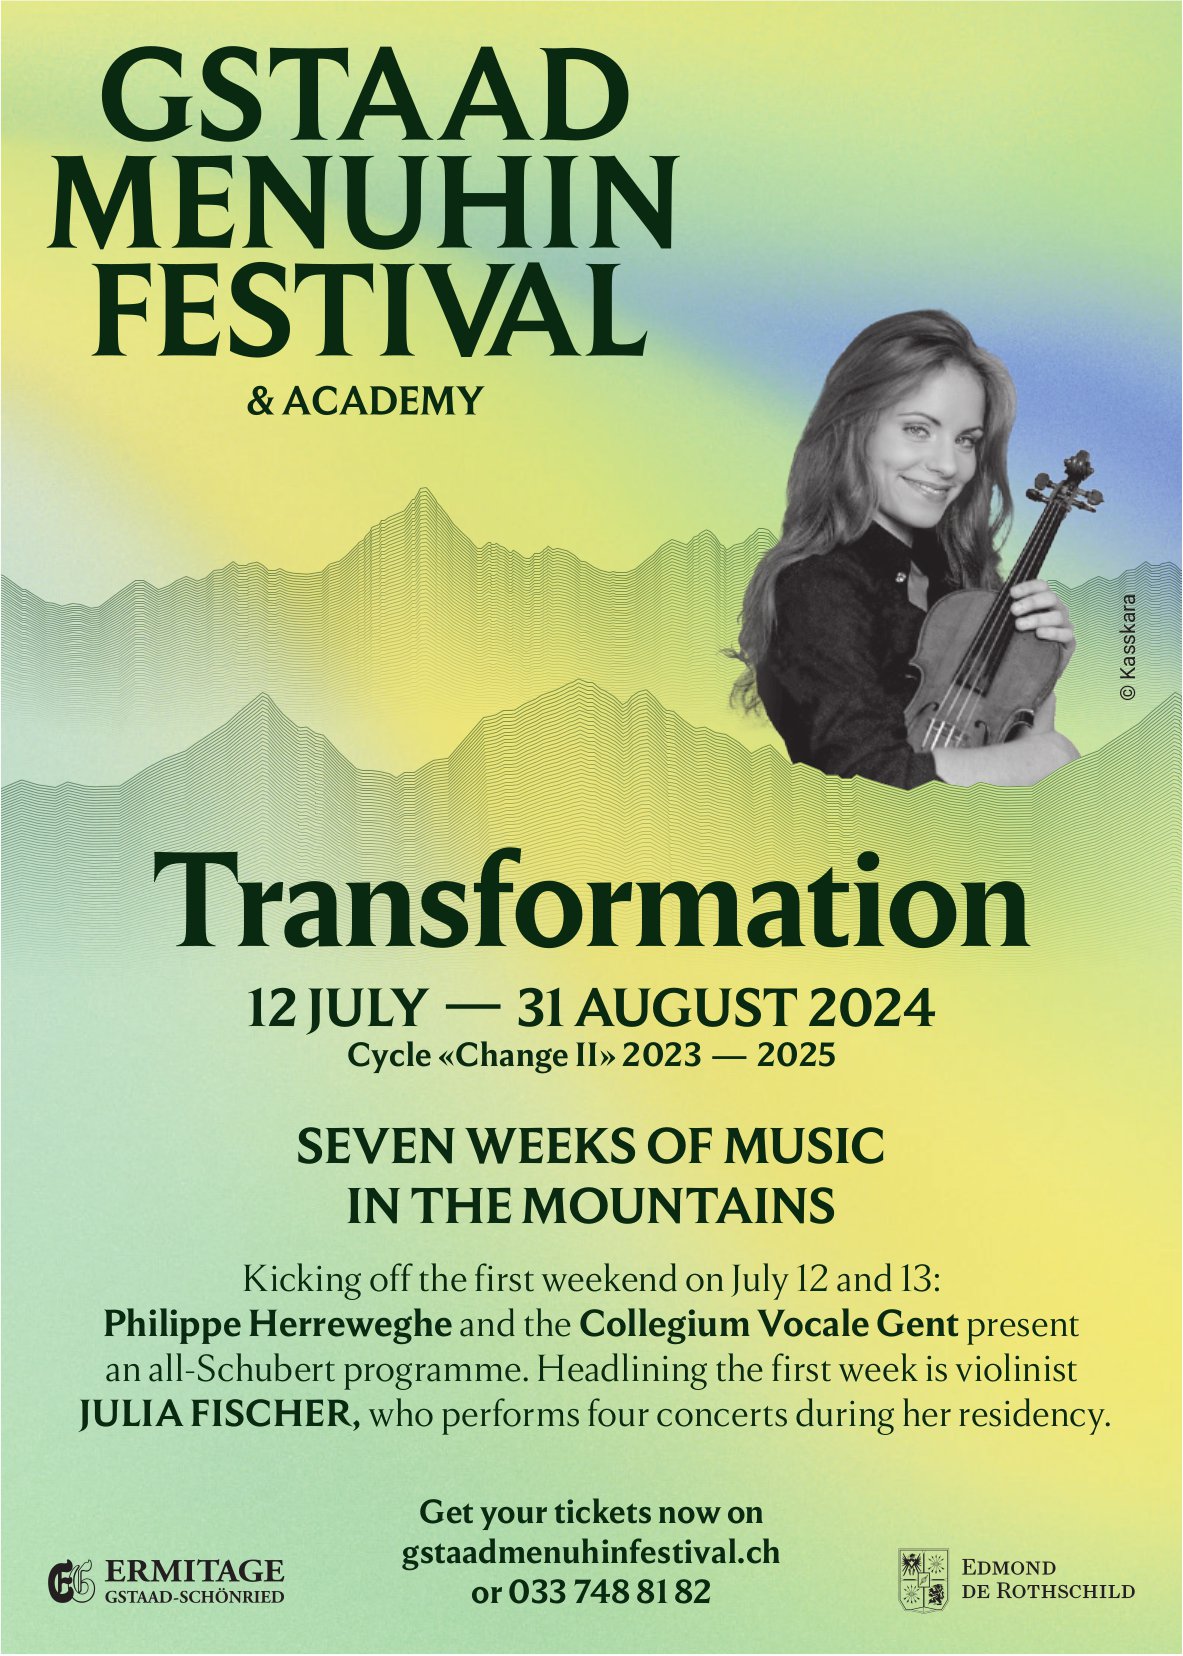 Transformation - Seven weeks of music in the mountains, 12. Juli - 31. August, Menuhinfestival, Gstaad